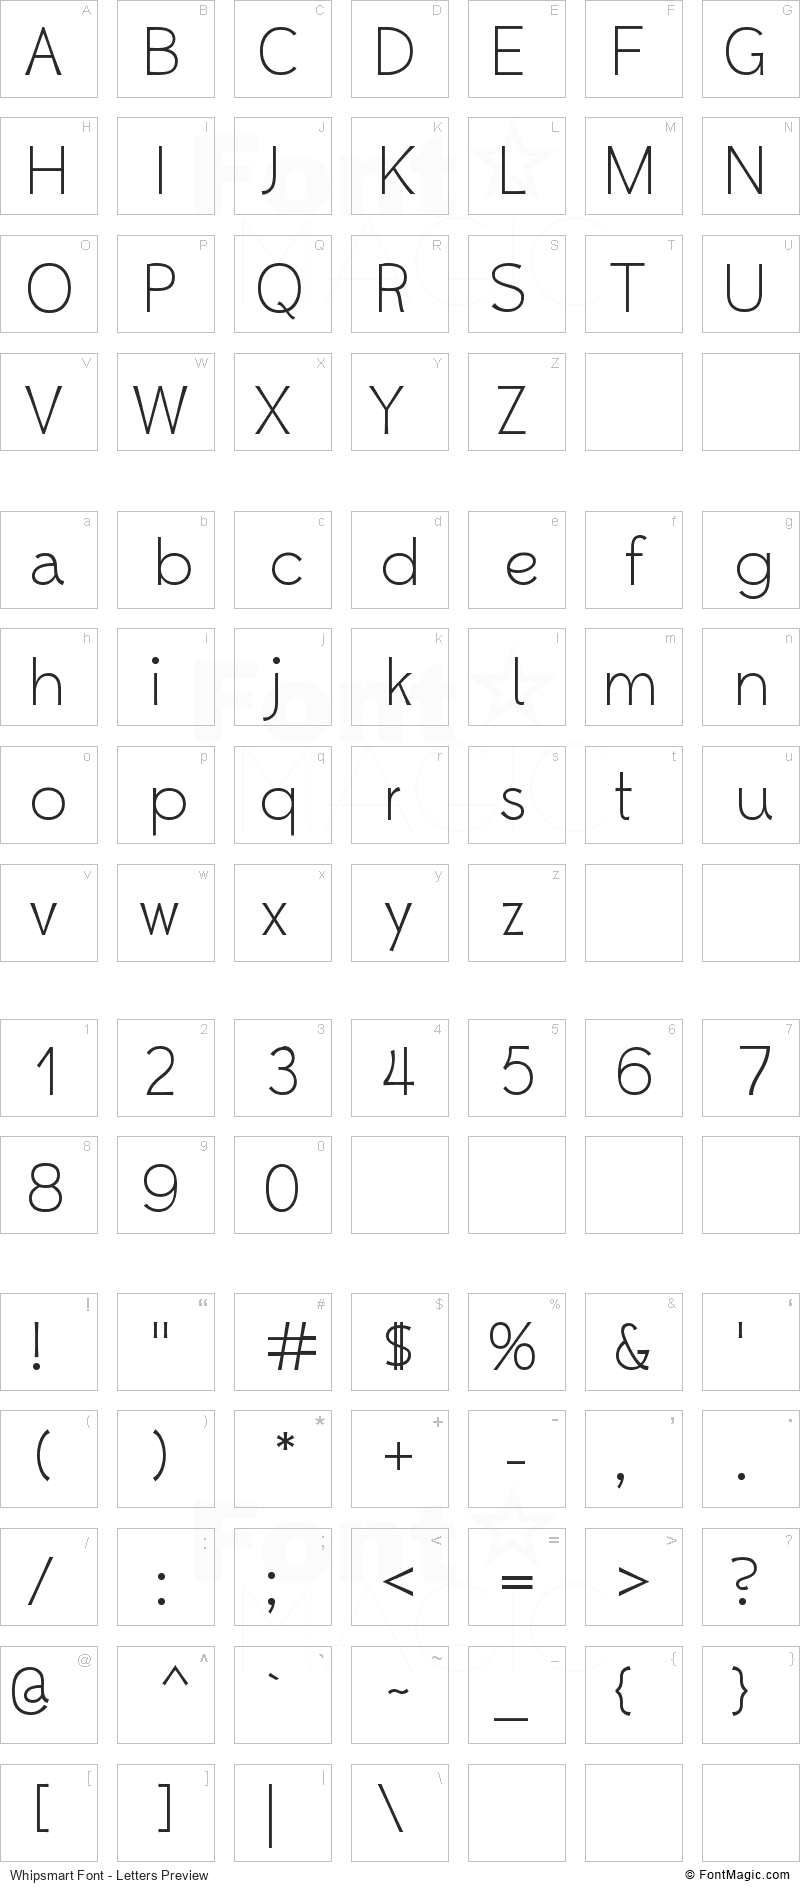 Whipsmart Font - All Latters Preview Chart